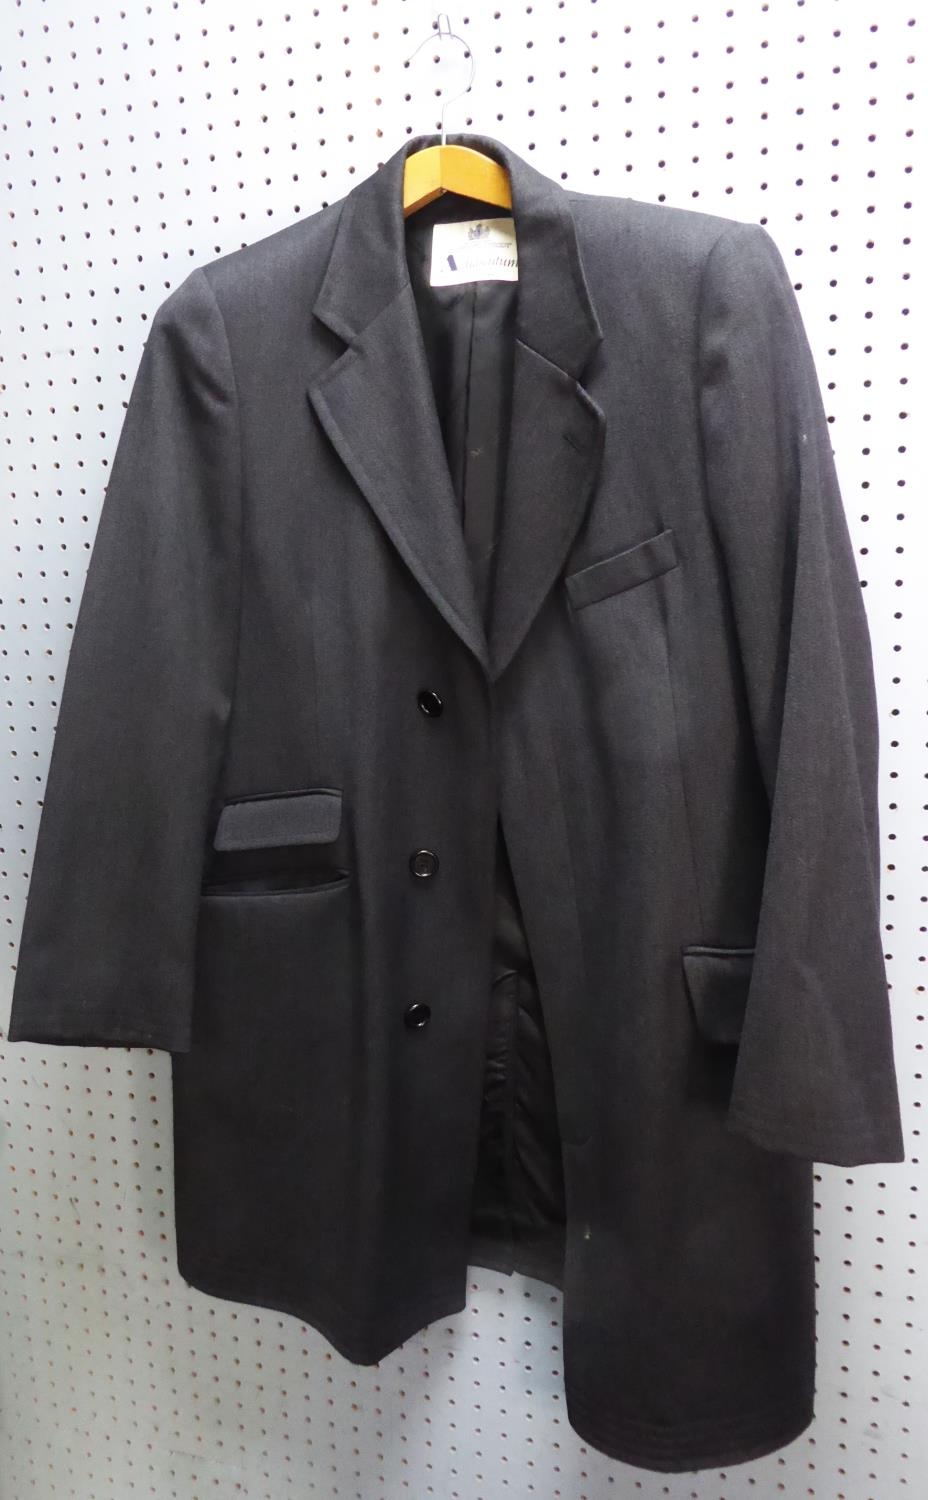 AQUASCUTUM OF LONDON GENTLEMAN'S DRESS OVERCOAT in 100% wool fine worsted cloth with faint self-